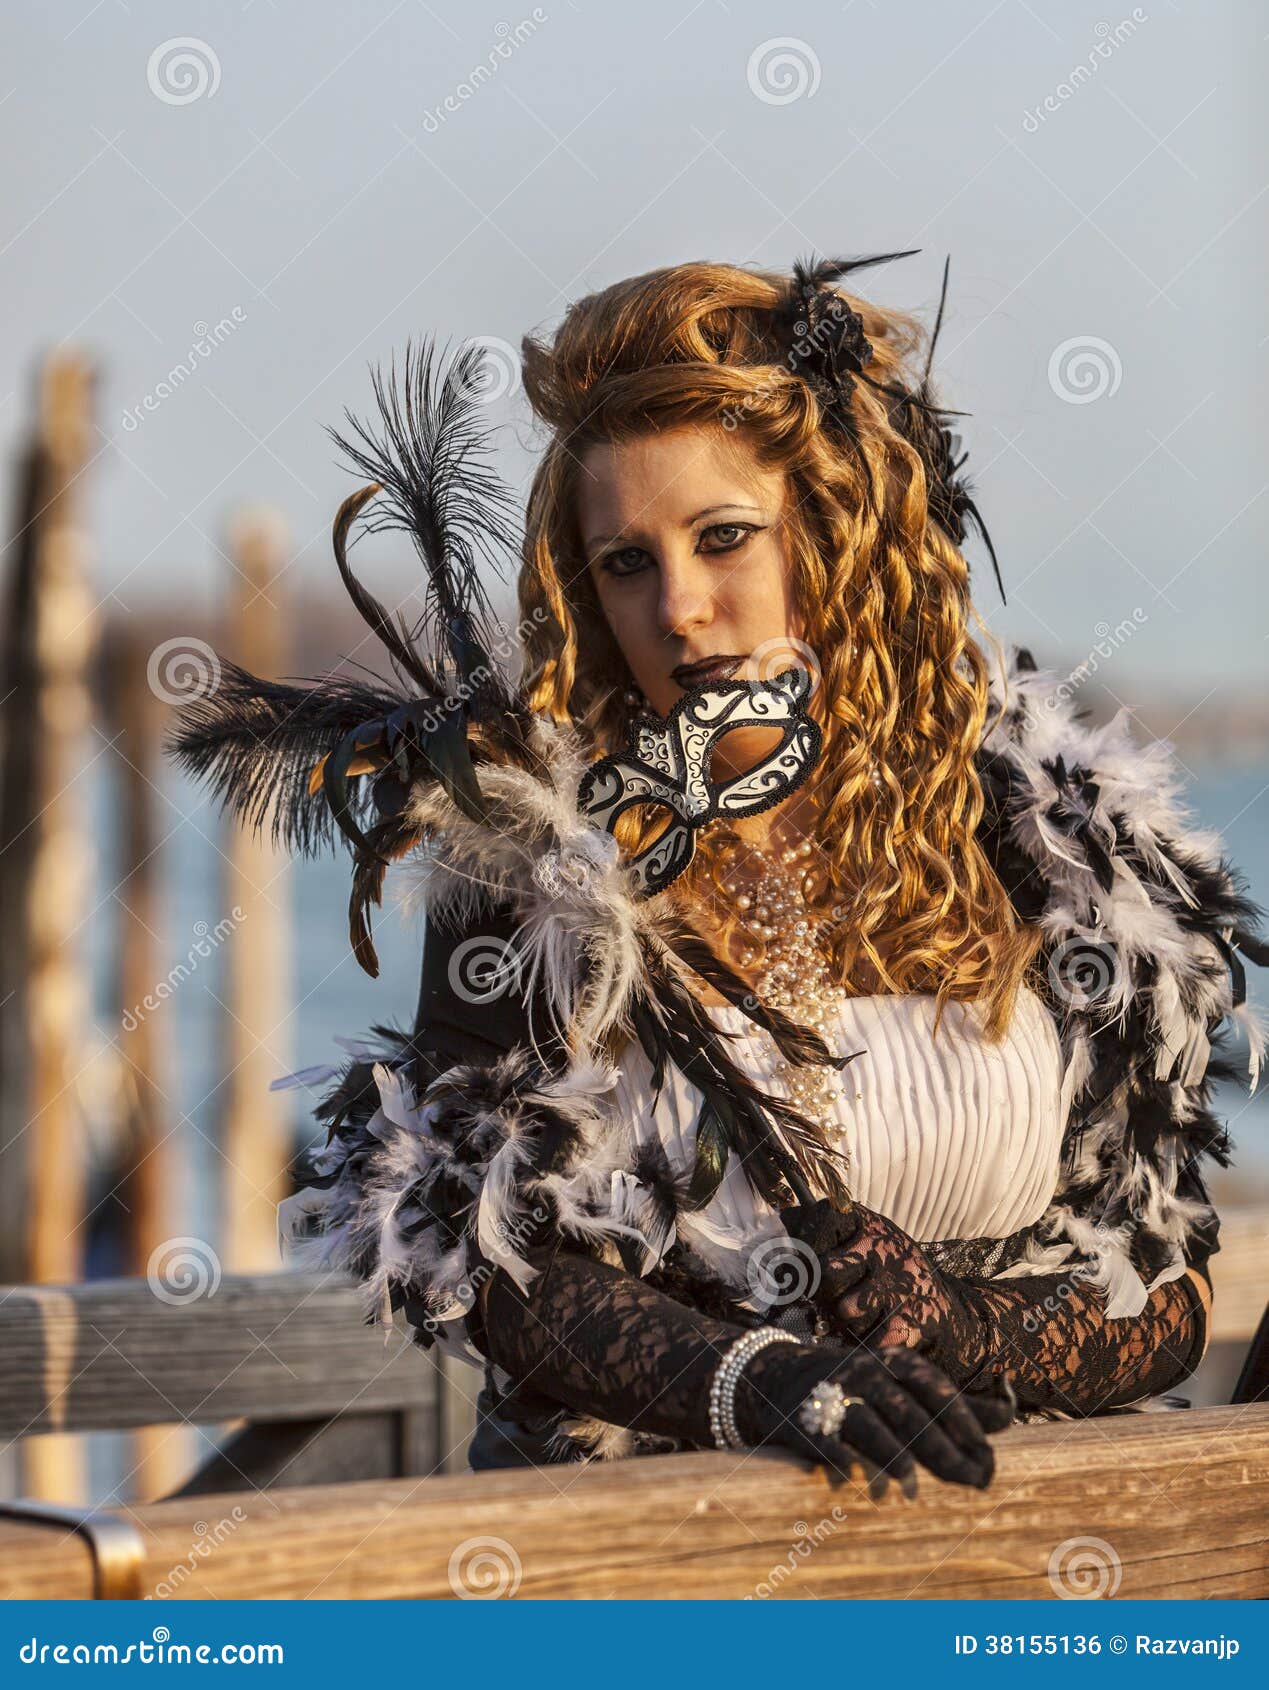 Woman with Colombina Mask editorial photo. Image of costume - 38155136